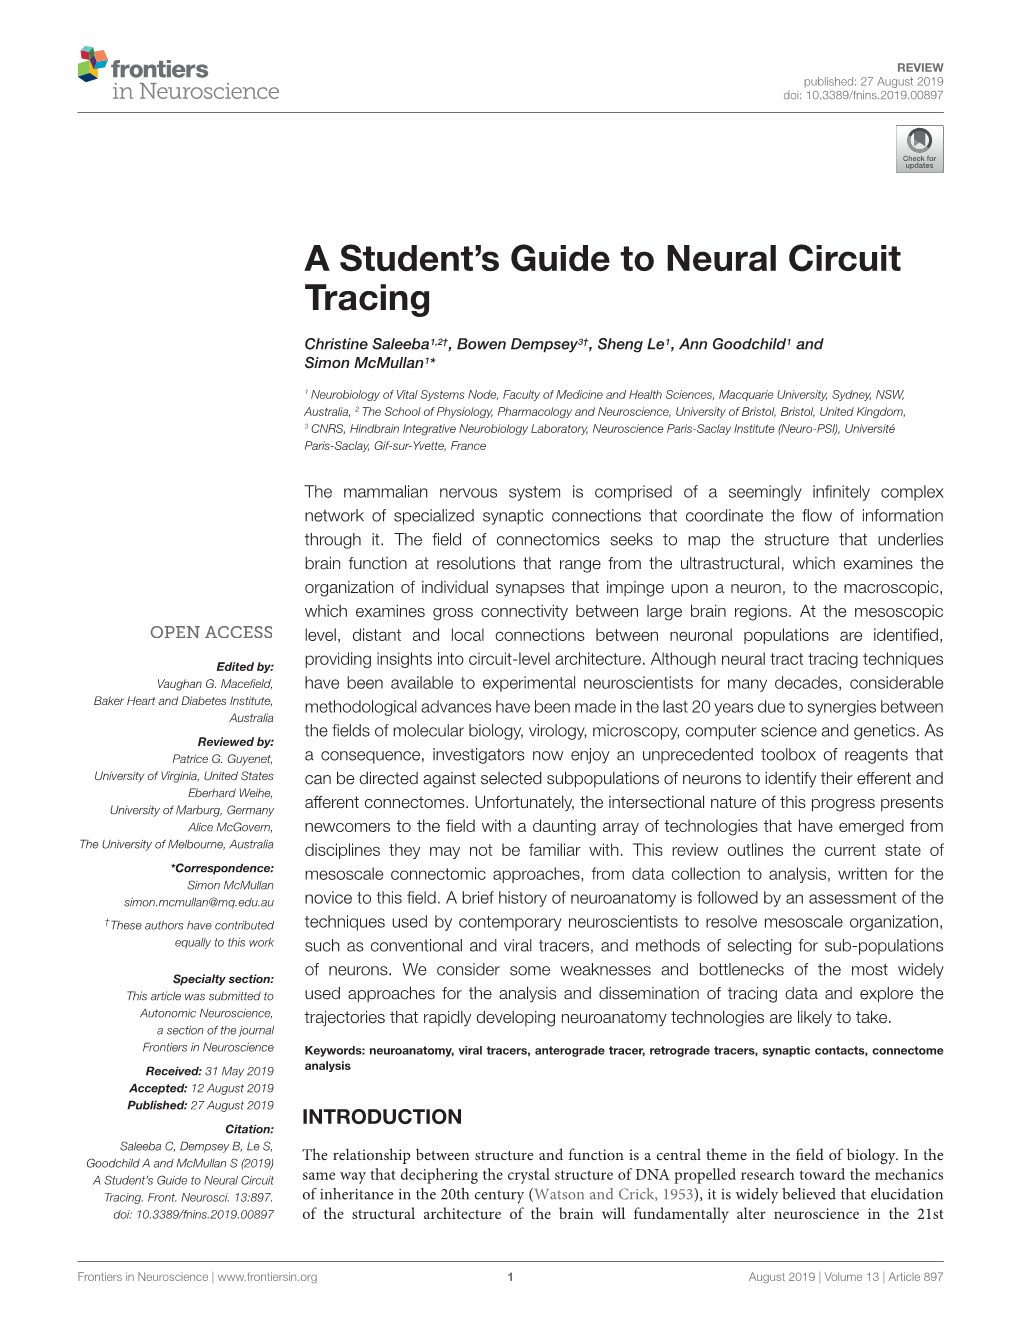 A Student's Guide to Neural Circuit Tracing